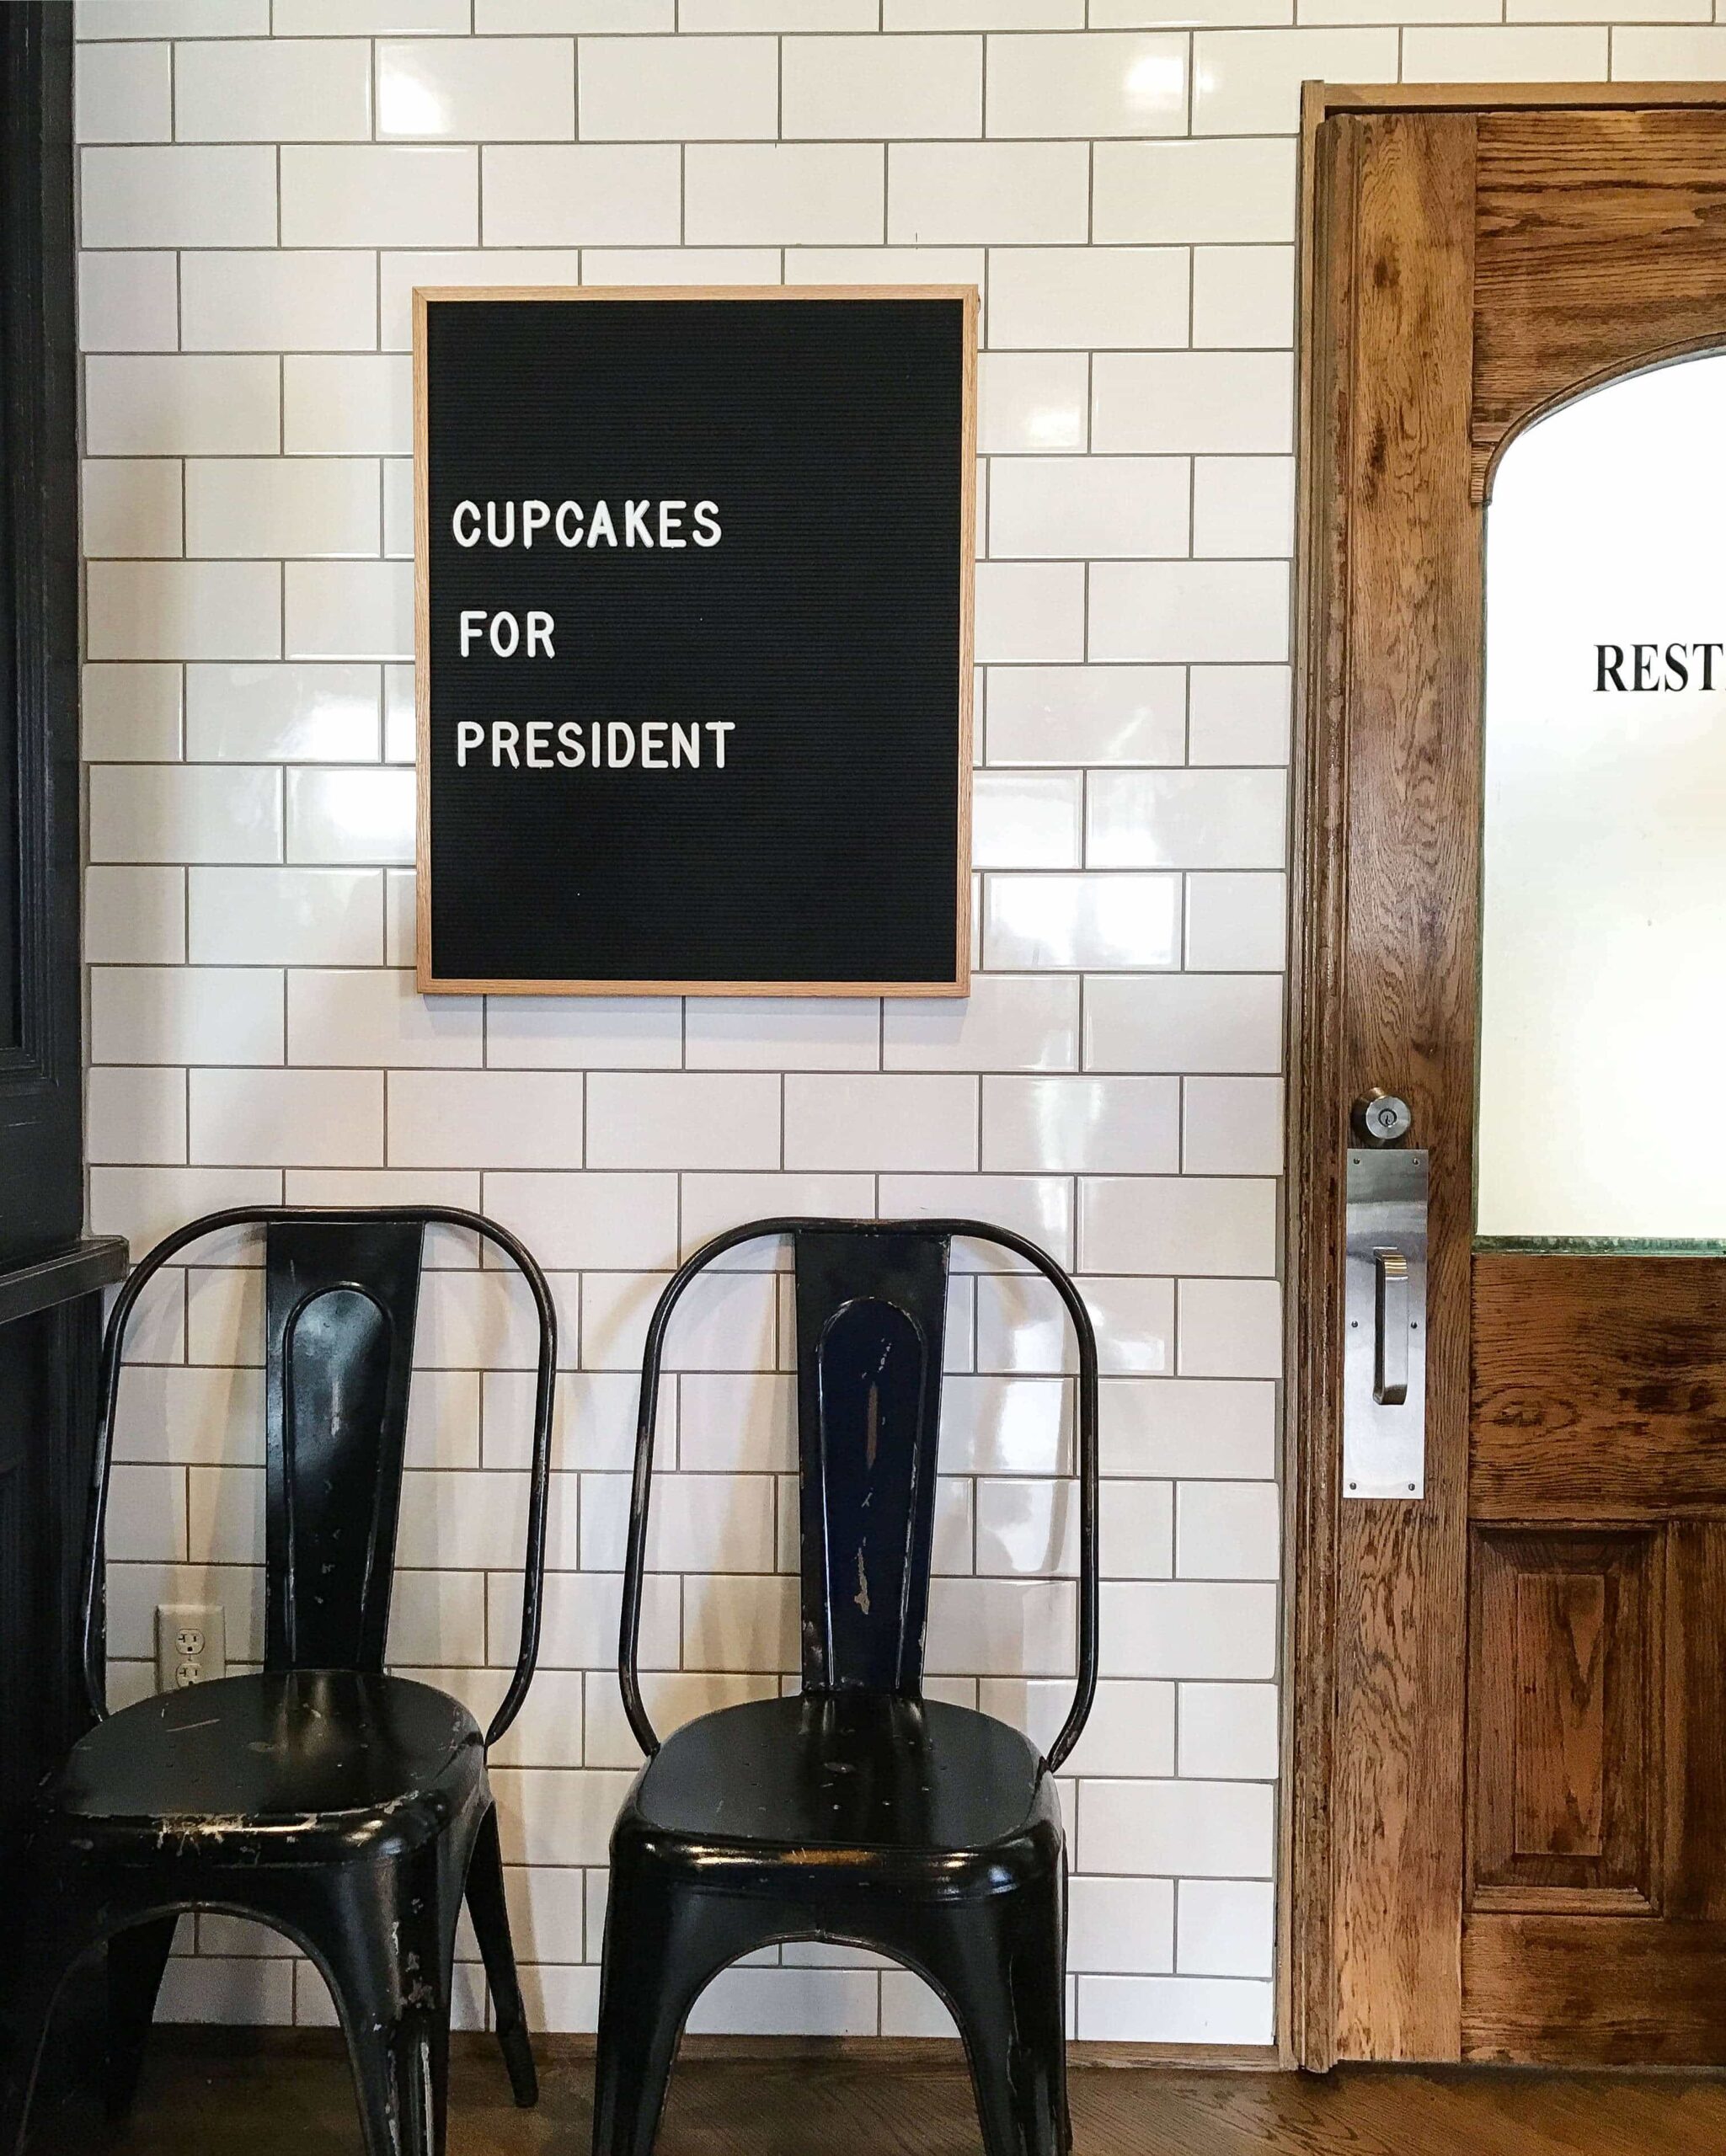 A Sign on a Shiplap Wall Beside a Restroom that Says "Cupcakes for President"